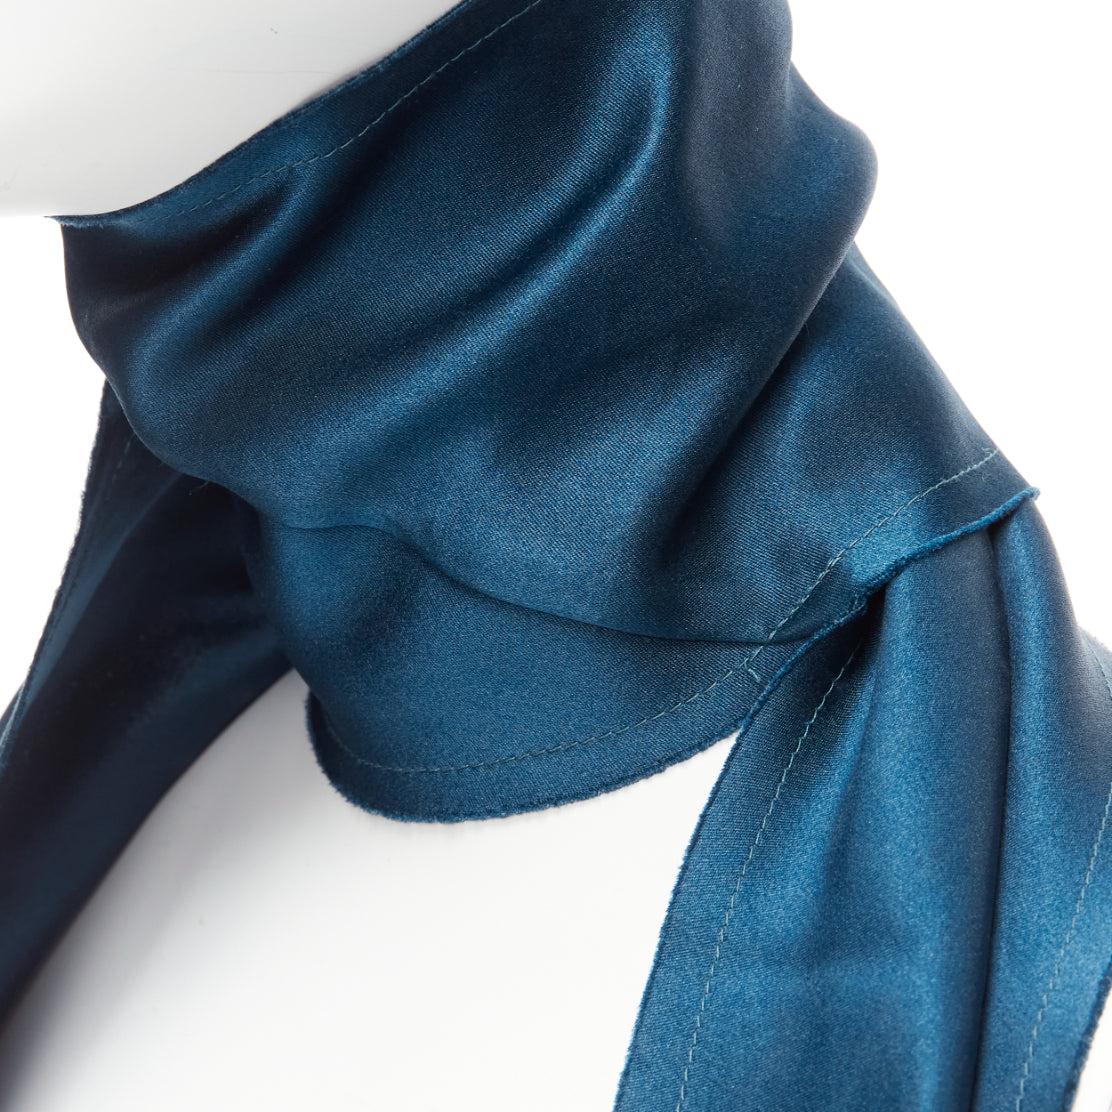 LANVIN teal blue 100% silk made in france frayed edge rectangular scarf
Reference: CNLE/A00272
Brand: Lanvin
Designer: Alber Elbaz
Material: Silk
Color: Blue
Pattern: Solid
Lining: Blue Silk
Made in: France

CONDITION:
Condition: Excellent, this